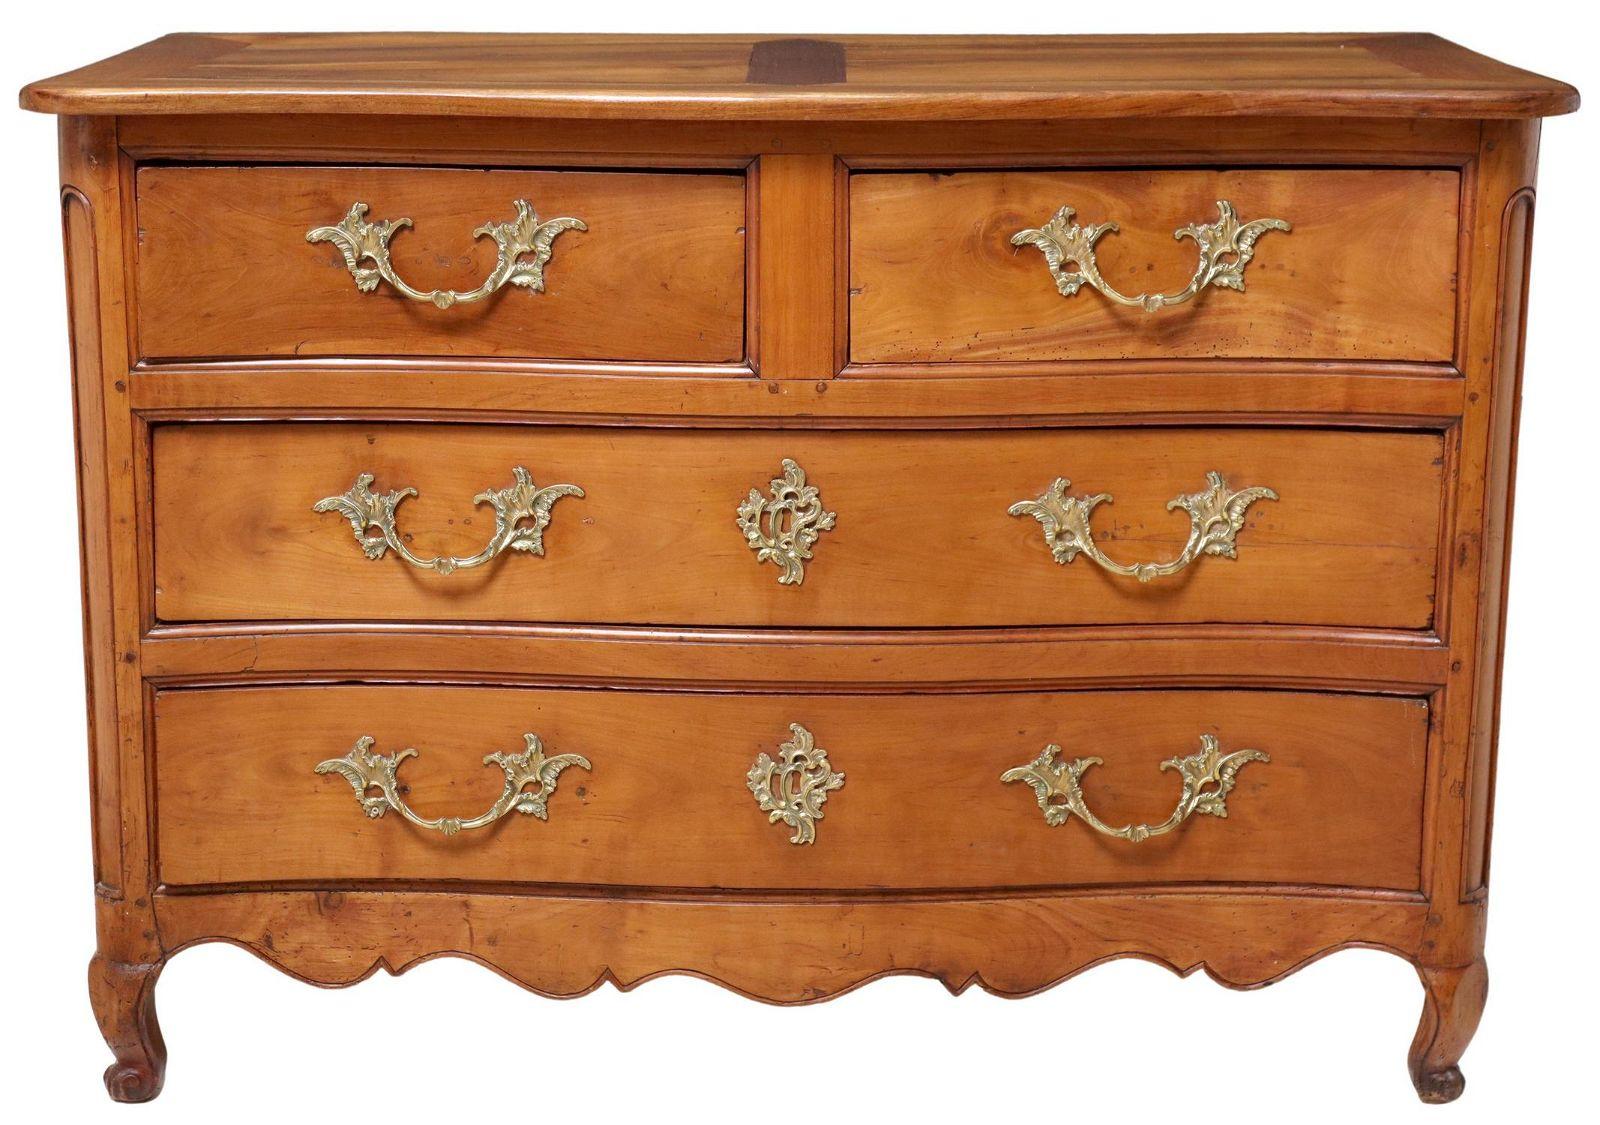 Antique French Louis XV walnut and fruitwood commode, 18th c. The chest consists of two short drawers over two long drawers, rising on short cabriole legs. Brass hardware is also original. There is some intentional bowing to the front drawers and